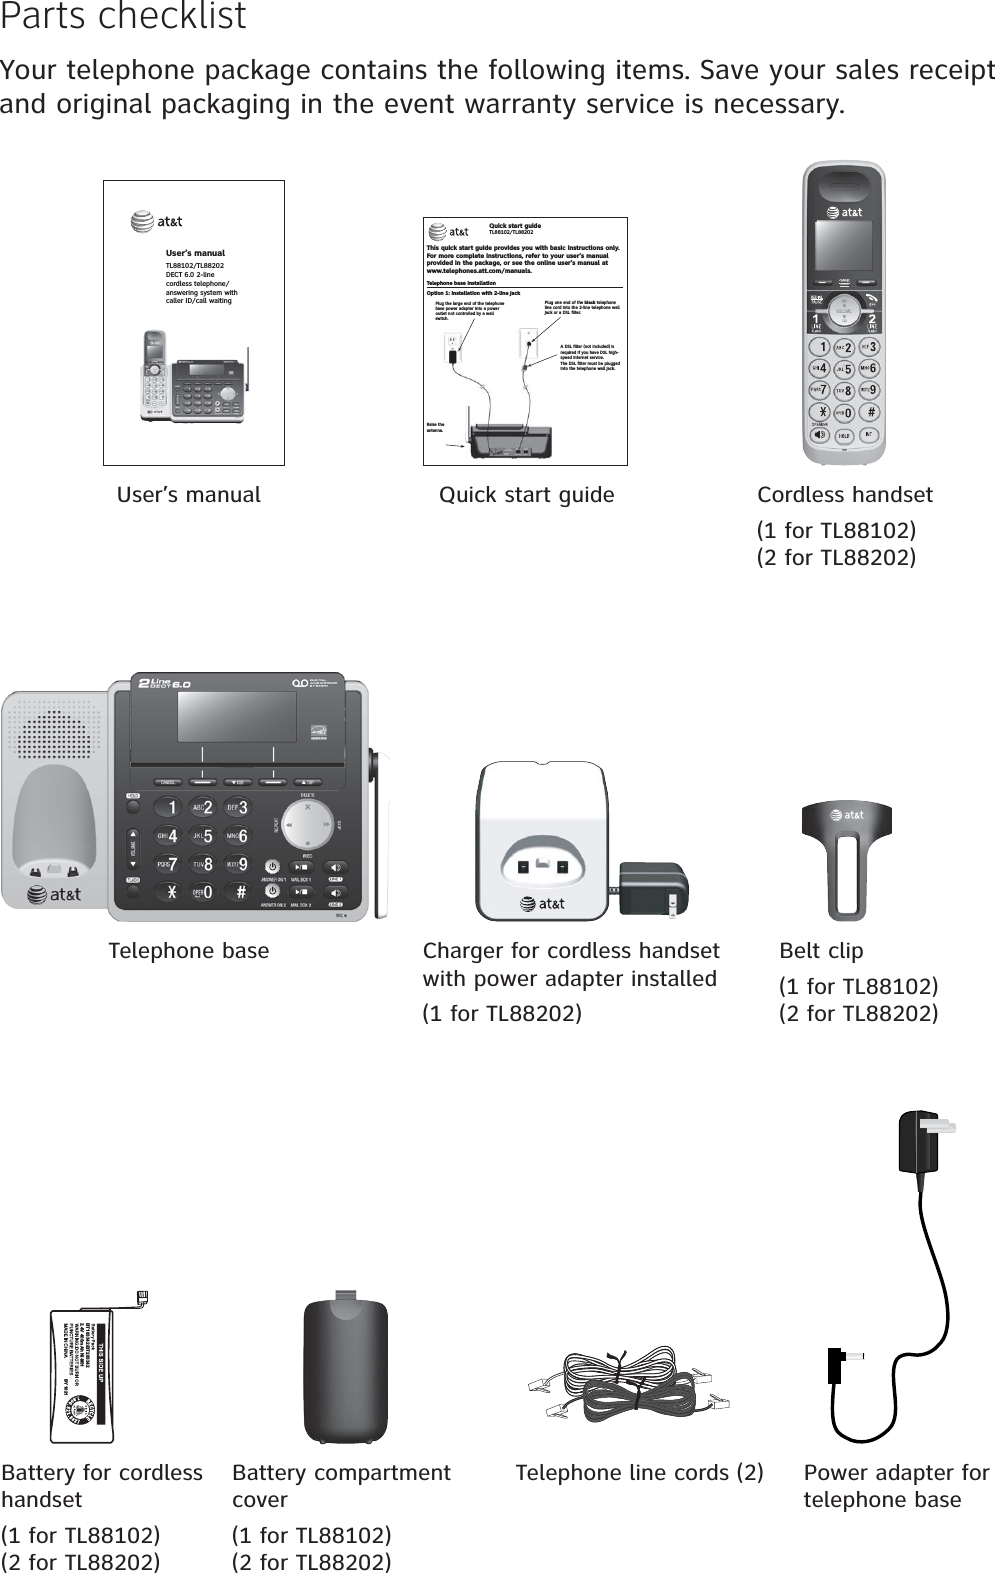 Parts checklistYour telephone package contains the following items. Save your sales receipt and original packaging in the event warranty service is necessary.Cordless handset(1 for TL88102)(2 for TL88202)Charger for cordless handset with power adapter installed(1 for TL88202)Battery compartment cover(1 for TL88102)(2 for TL88202)Telephone line cords (2) Power adapter for telephone baseTelephone baseBattery for cordless handset(1 for TL88102)(2 for TL88202)User’s manual Quick start guideBelt clip(1 for TL88102)(2 for TL88202)BY 1021 BT183342/BT2833422.4V 400mAh Ni-MHUser’s manualTL88102/TL88202DECT 6.0 2-line cordless telephone/answering system withcaller ID/call waitingTelephone base installationThis quick start guide provides you with basic instructions only. For more complete instructions, refer to your user’s manual provided in the package, or see the online user’s manual at www.telephones.att.com/manuals.Quick start guideTL88102/TL88202Plug one end of the black telephone line cord into the 2-line telephone wall jack or a DSL filter.Plug the large end of the telephone base power adapter into a power outlet not controlled by a wall switch. A DSL filter (not included) is required if you have DSL high-speed Internet service.The DSL filter must be plugged into the telephone wall jack.Raise the antenna.Option 1: Installation with 2-line jack